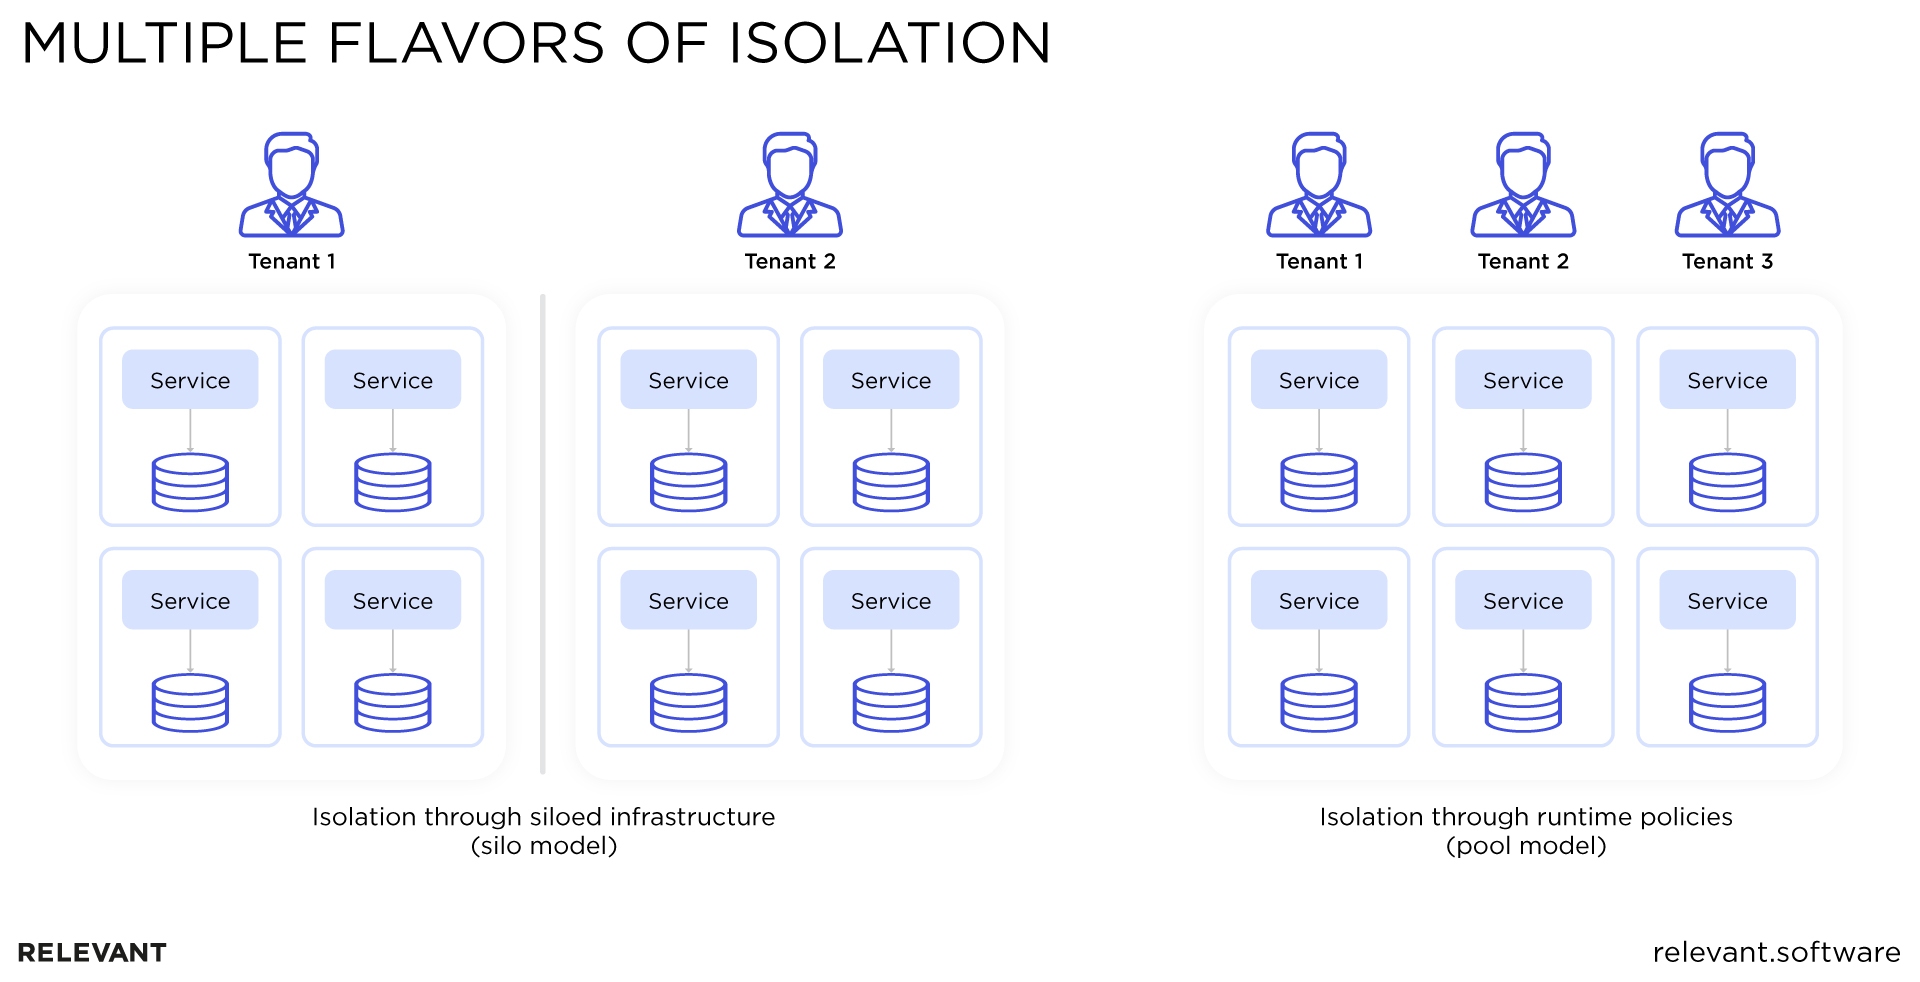 ways to approach SaaS security concerns related to tenant isolation